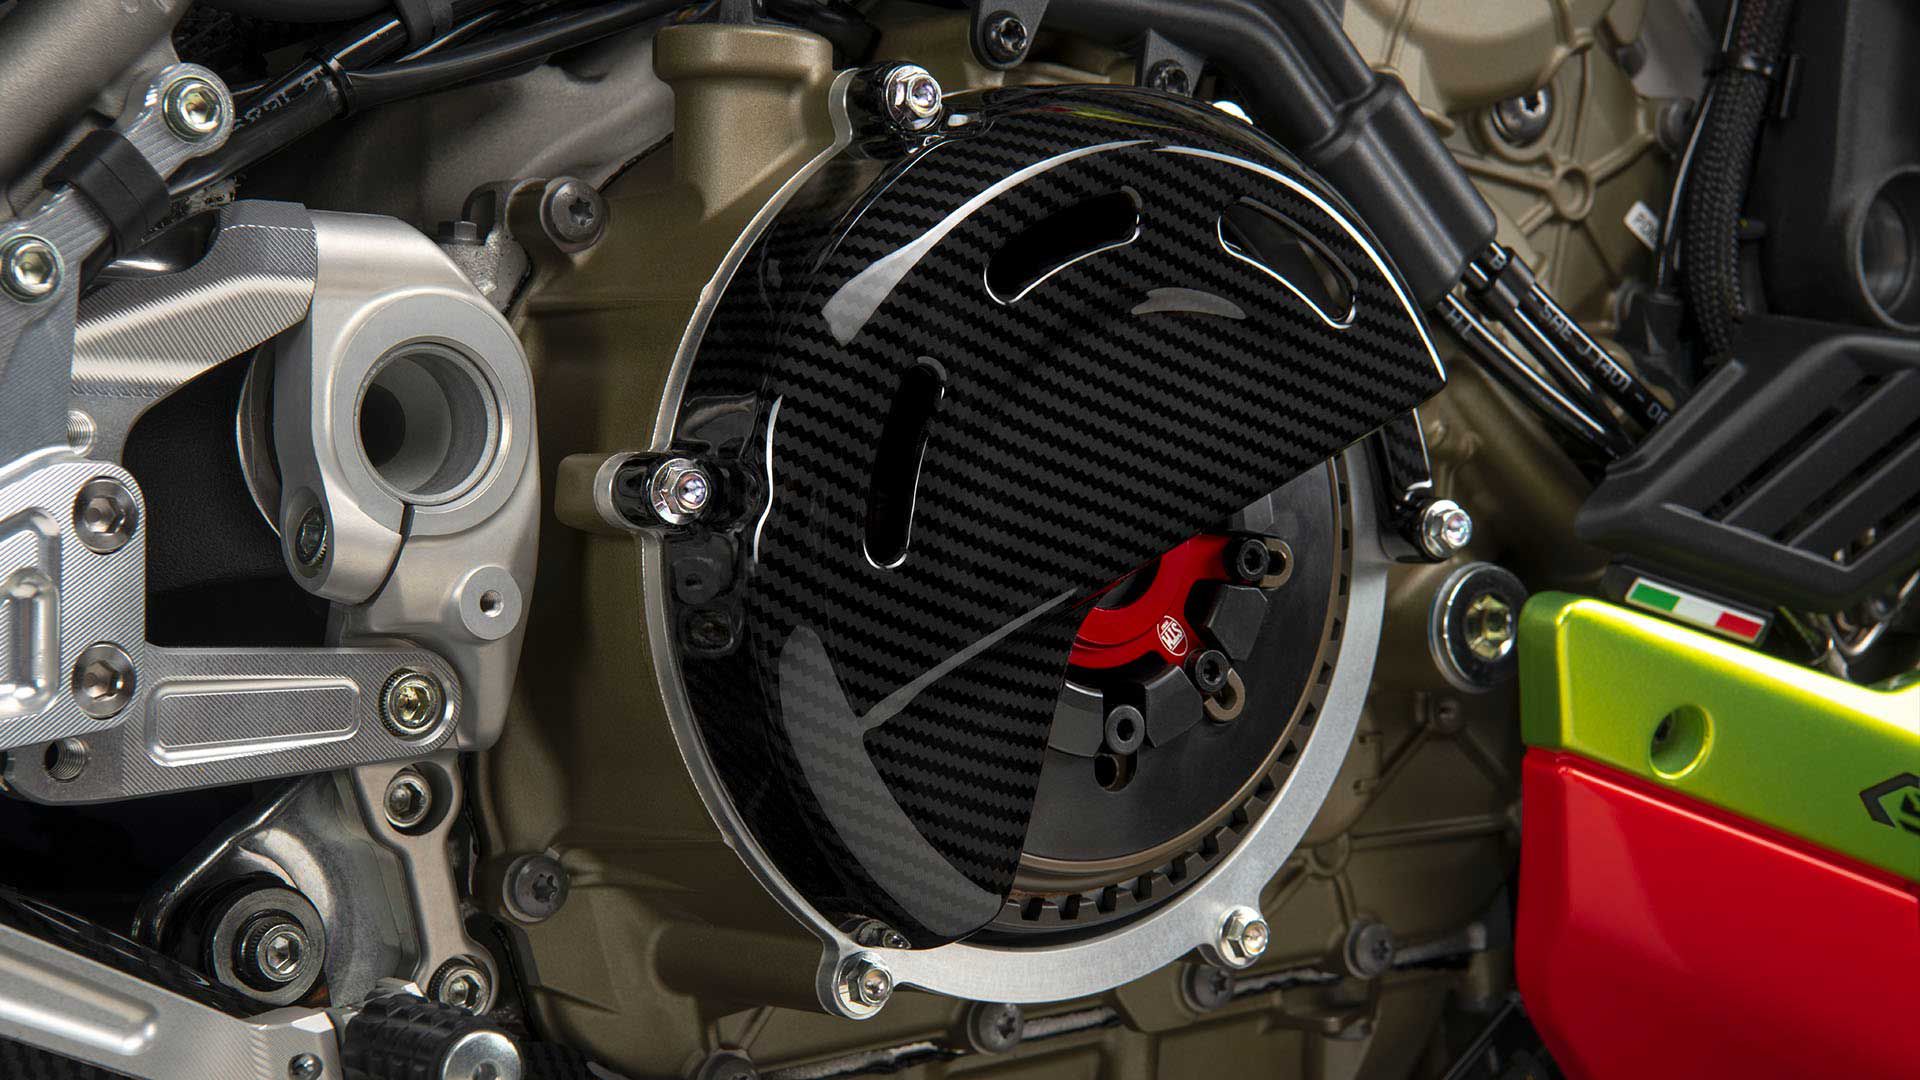 Trackday junkies take note: the carbon fiber dry clutch cover.